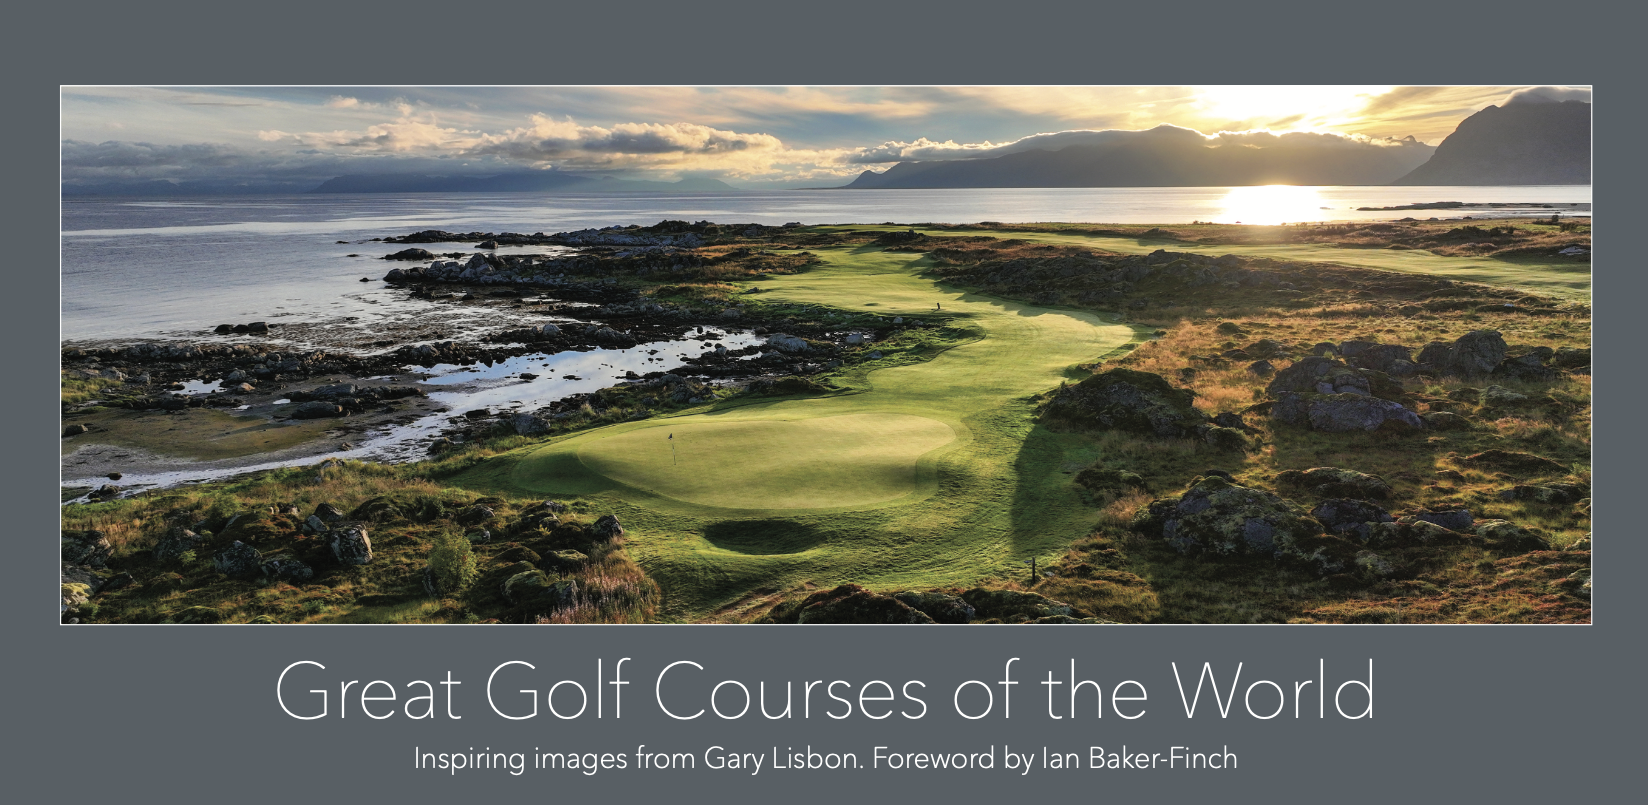 Great Golf Courses of the World